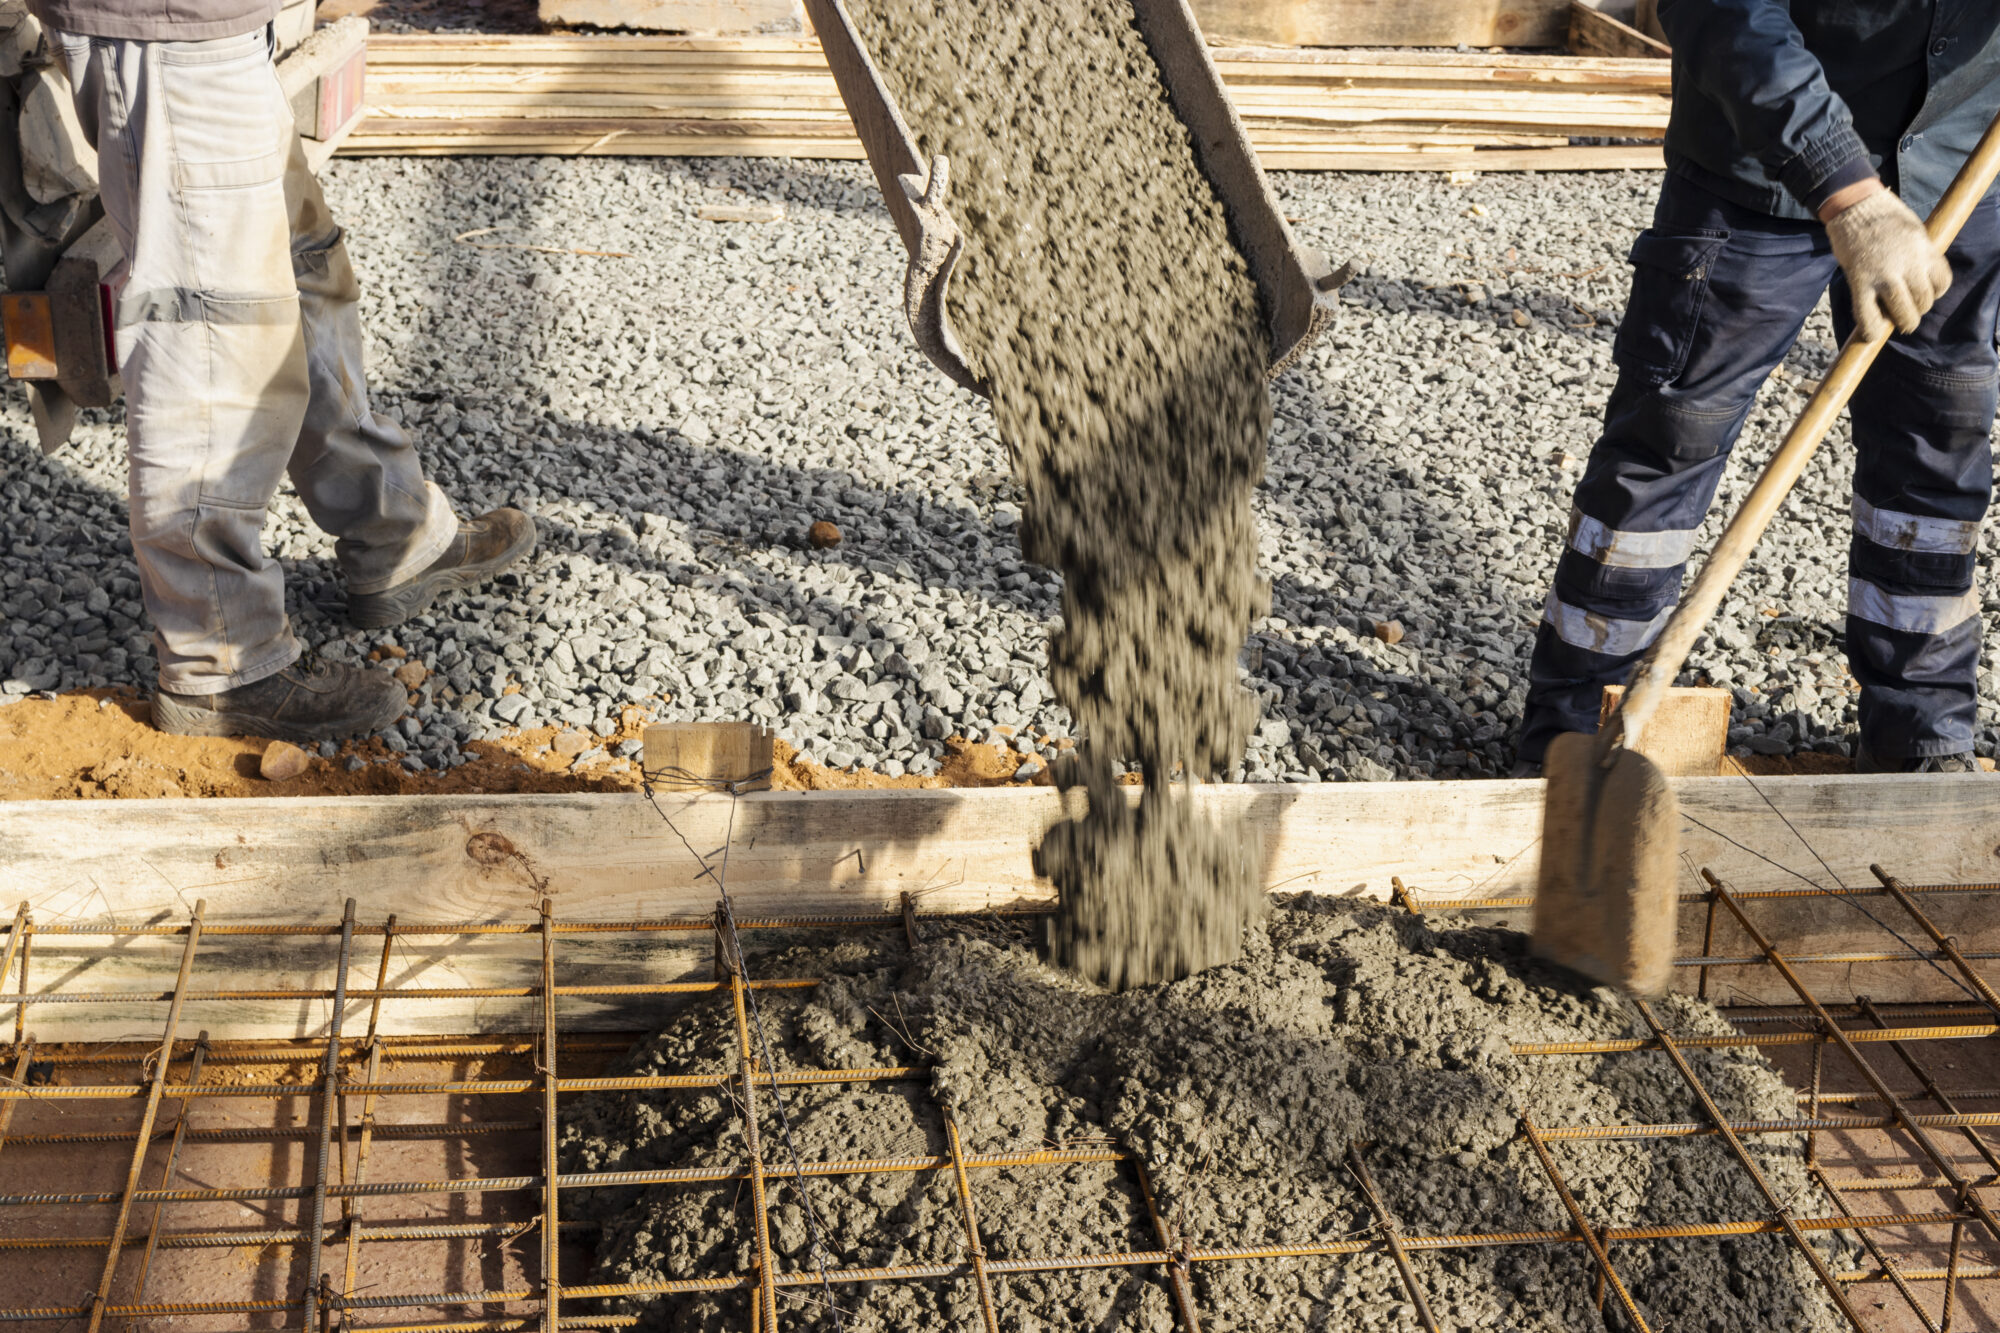 Pouring cement or concrete with a concrete mixer truck, construction site with a reinforced grillage foundation. Workers settle and level the concrete in the foundation